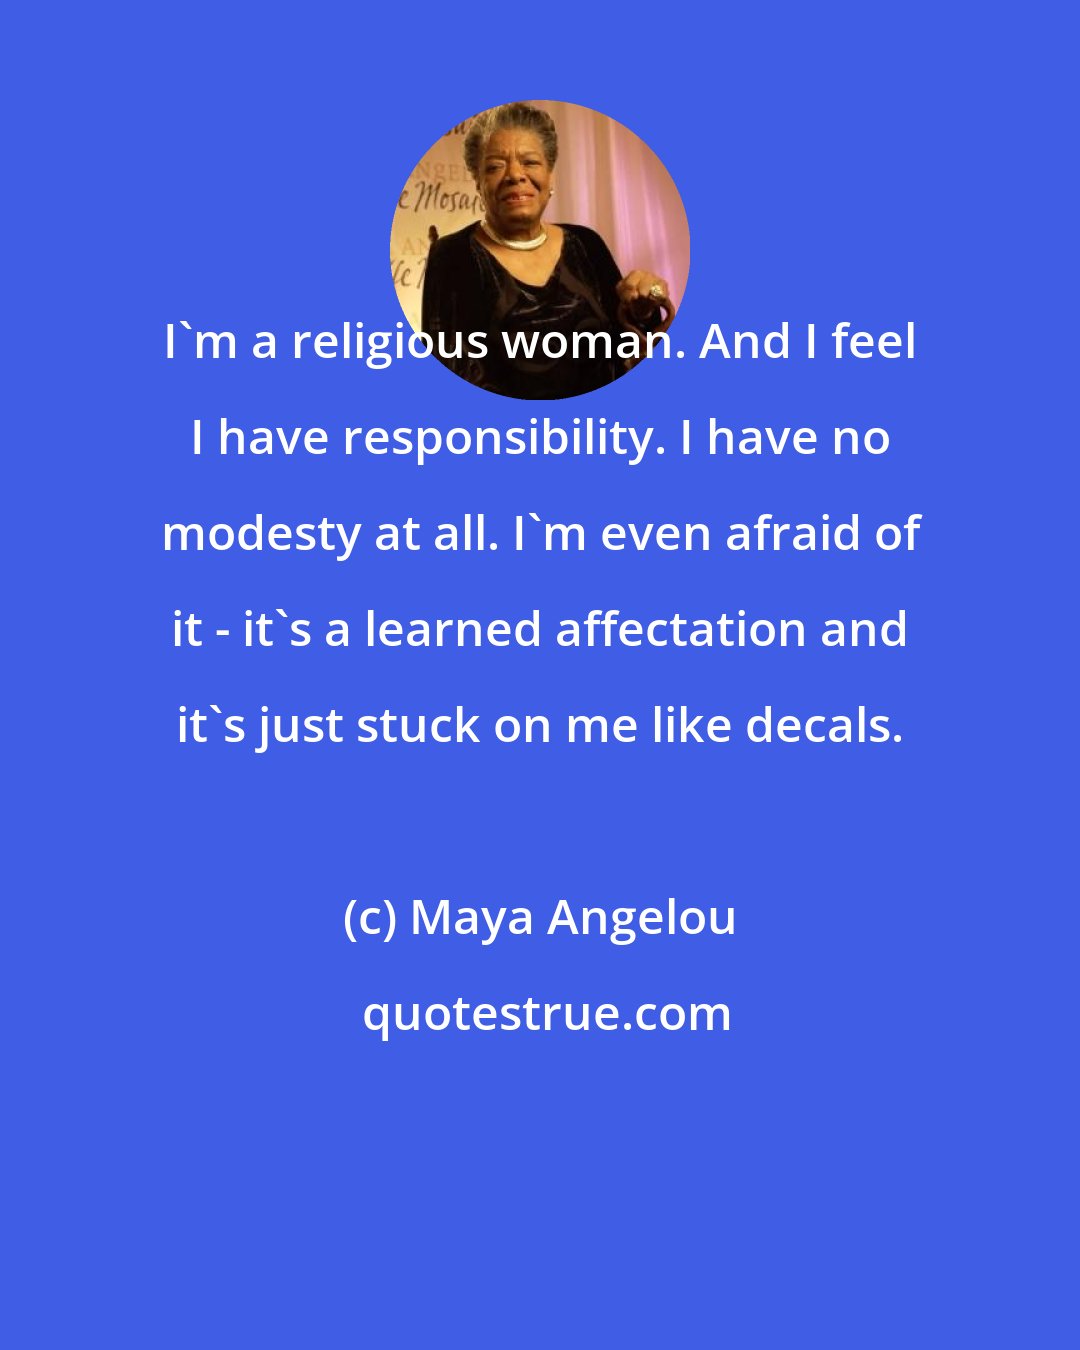 Maya Angelou: I'm a religious woman. And I feel I have responsibility. I have no modesty at all. I'm even afraid of it - it's a learned affectation and it's just stuck on me like decals.